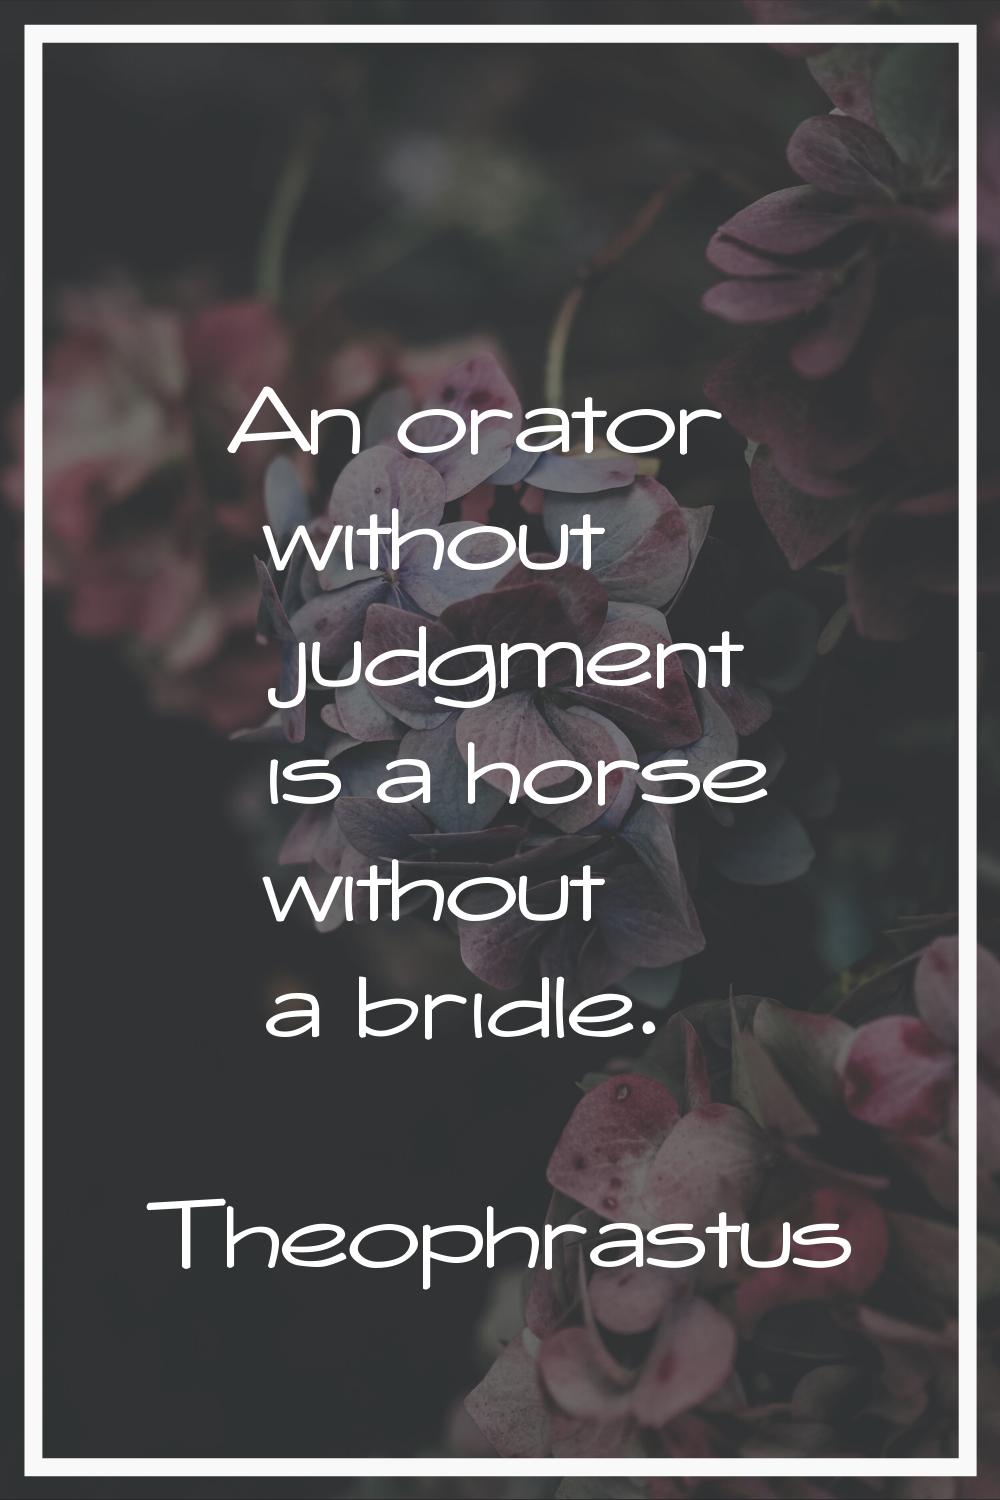 An orator without judgment is a horse without a bridle.